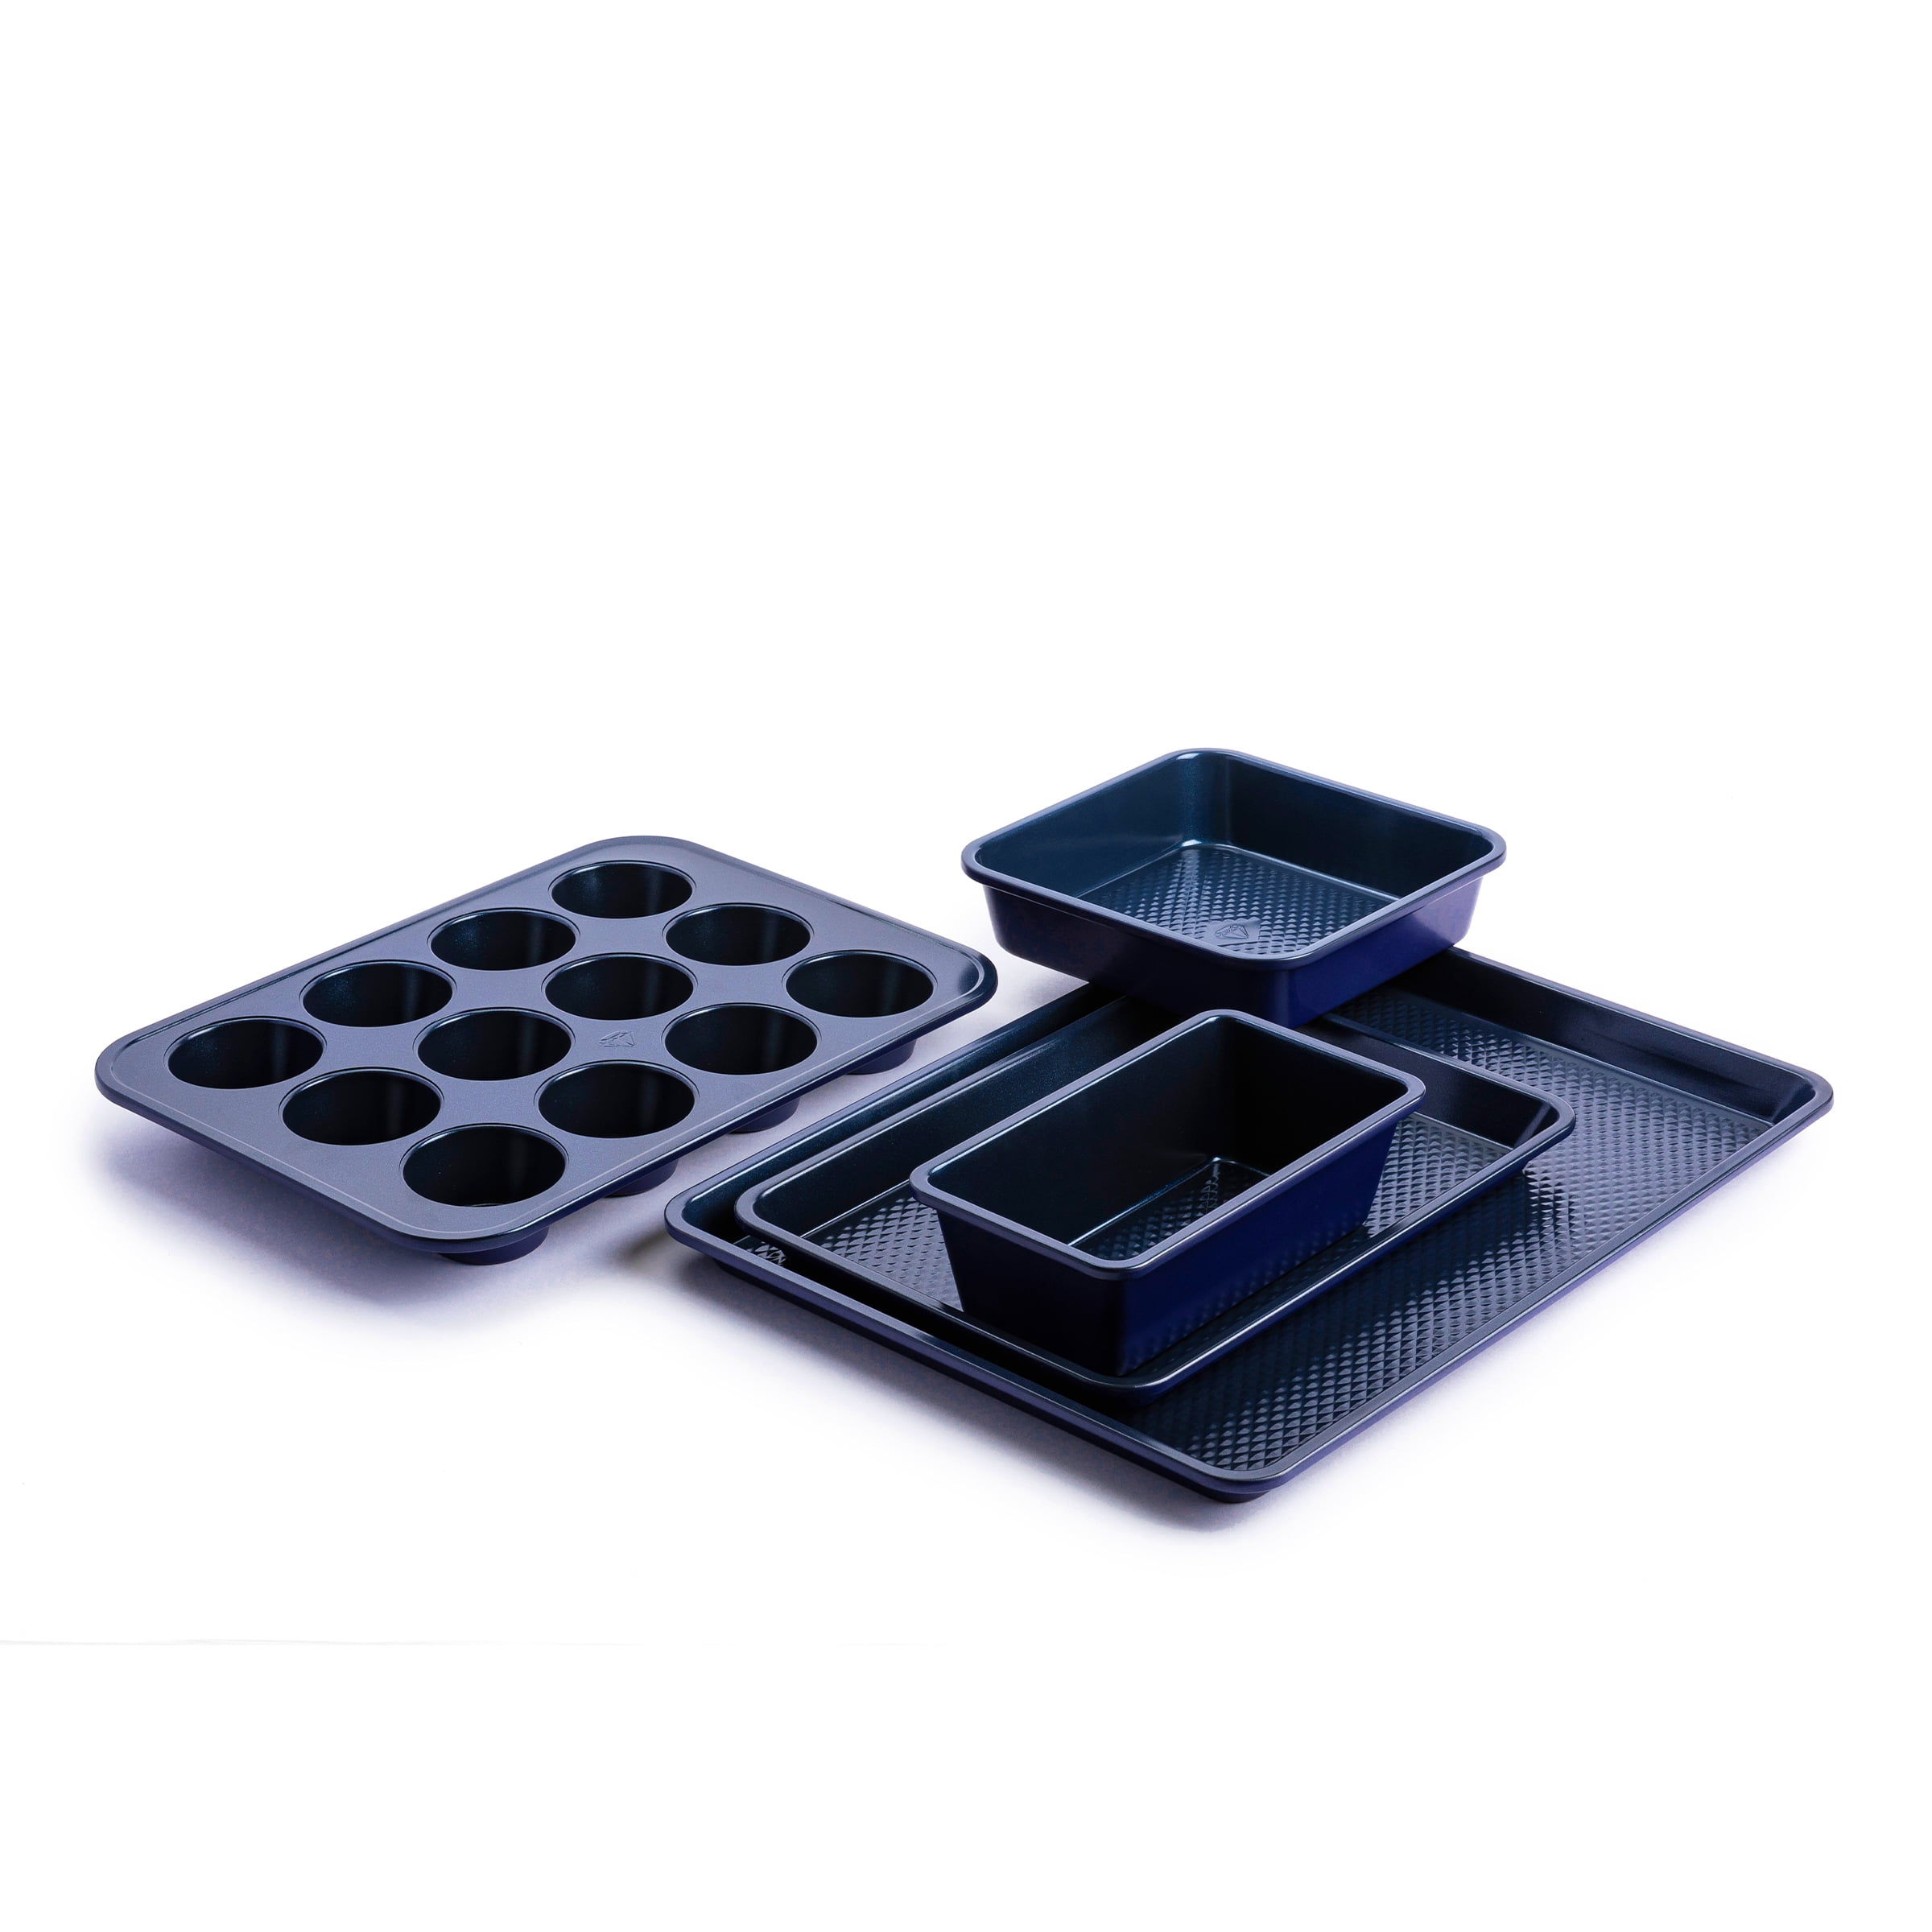 GreenLife Bakeware Healthy Ceramic Nonstick, 12 Cup Muffin and Cupcake Baking Pan, PFAS-Free, Blue